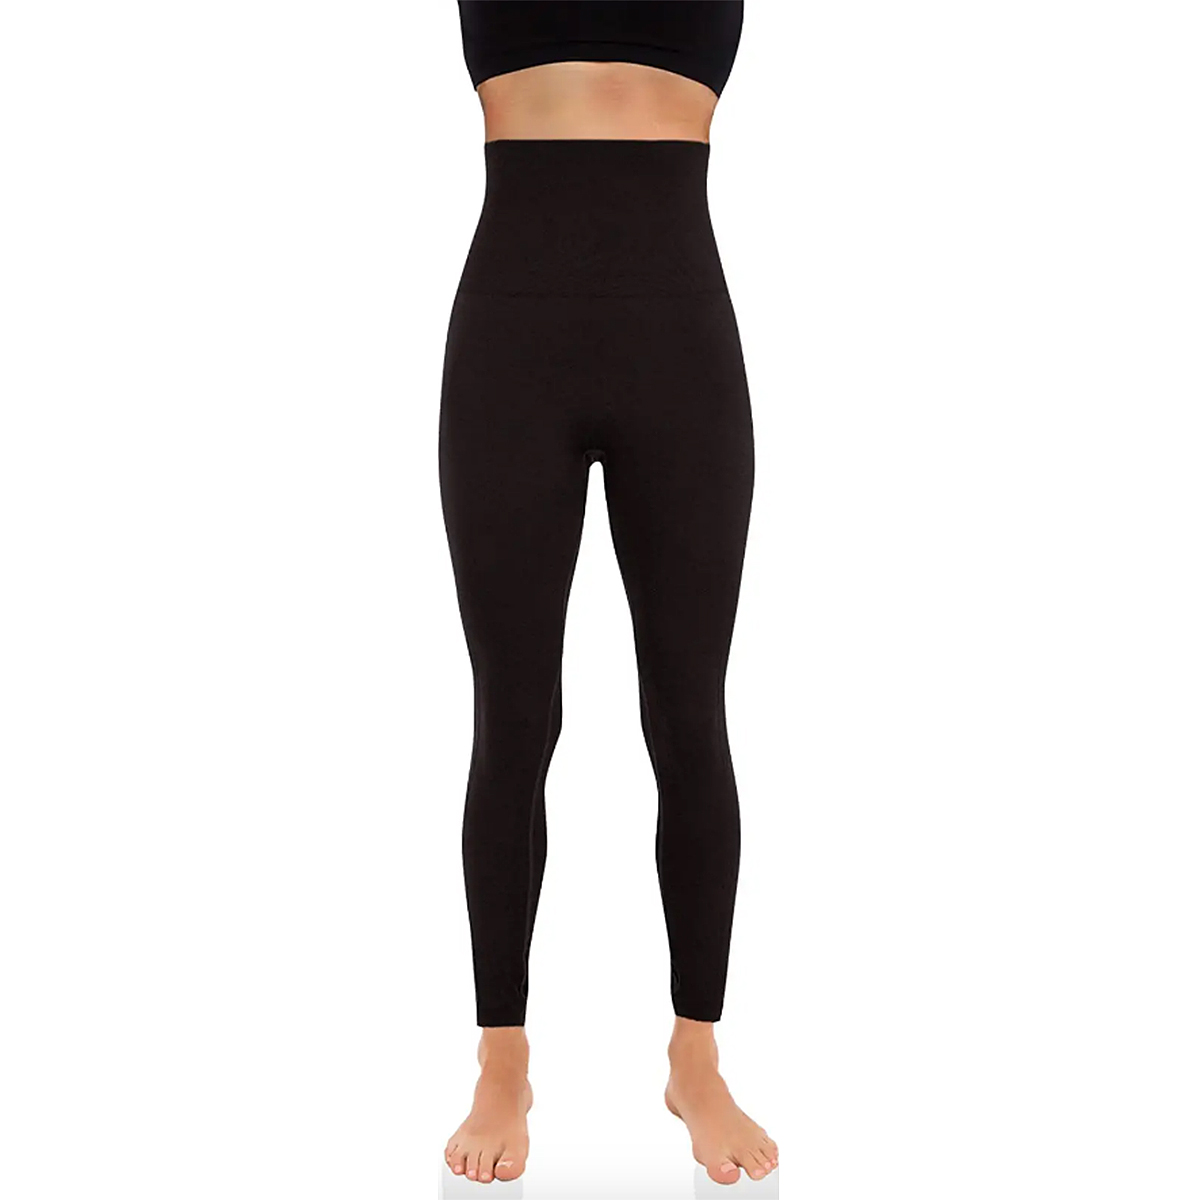 Compression Garments After Liposuction Shapewear Pants Mid-Calf-Length Post Surgical Compression Girdle with Zip MOXIN Compression Slimming Leggings High Waisted Pants 